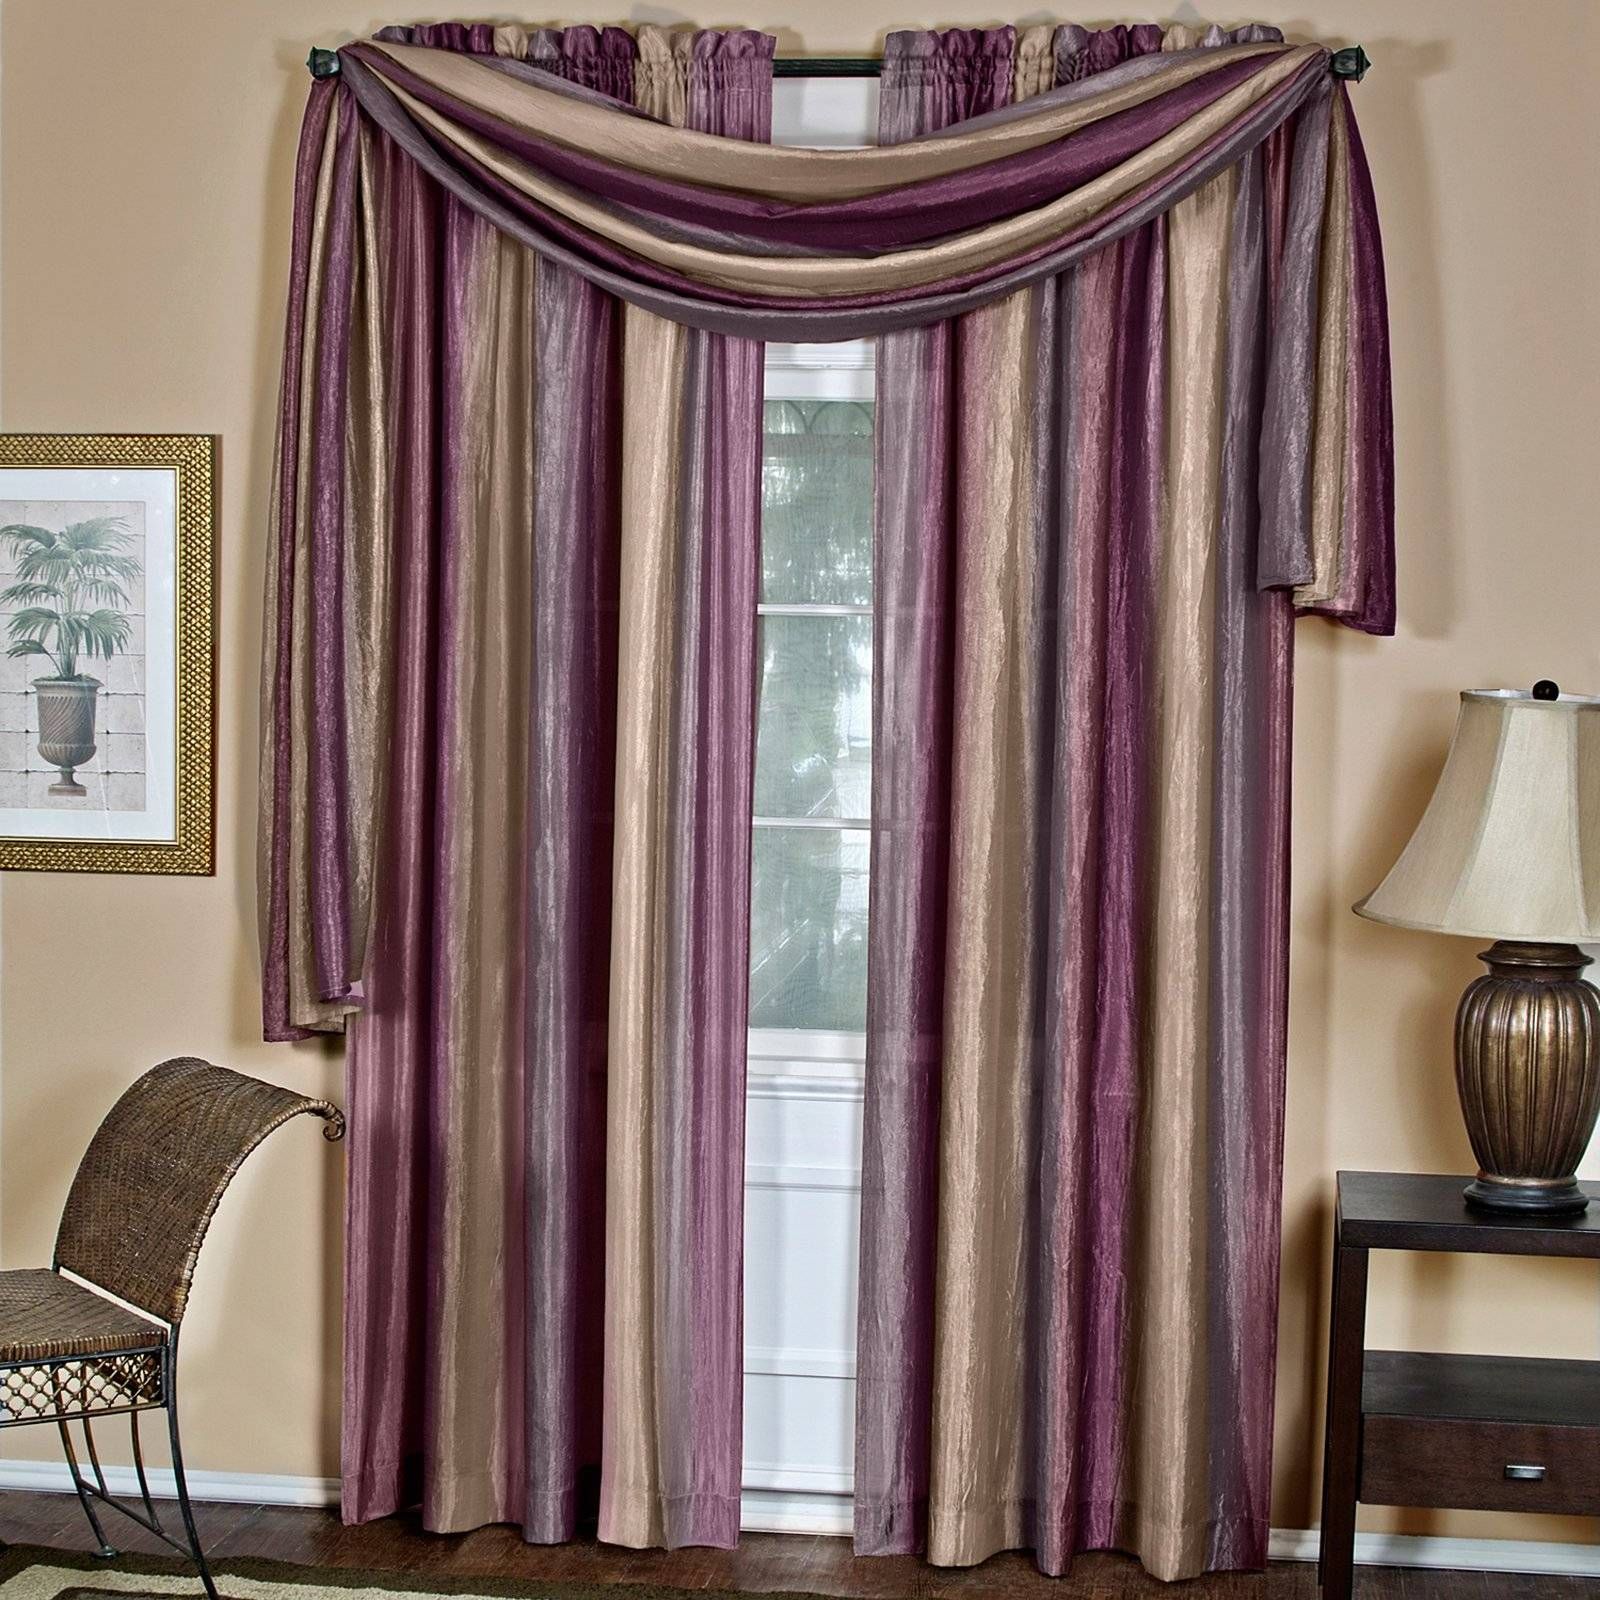 Appealing Curtains Bed Bath And Beyond Kitchen Stunning With Regard To Kitchen Window Tier Sets (View 12 of 20)